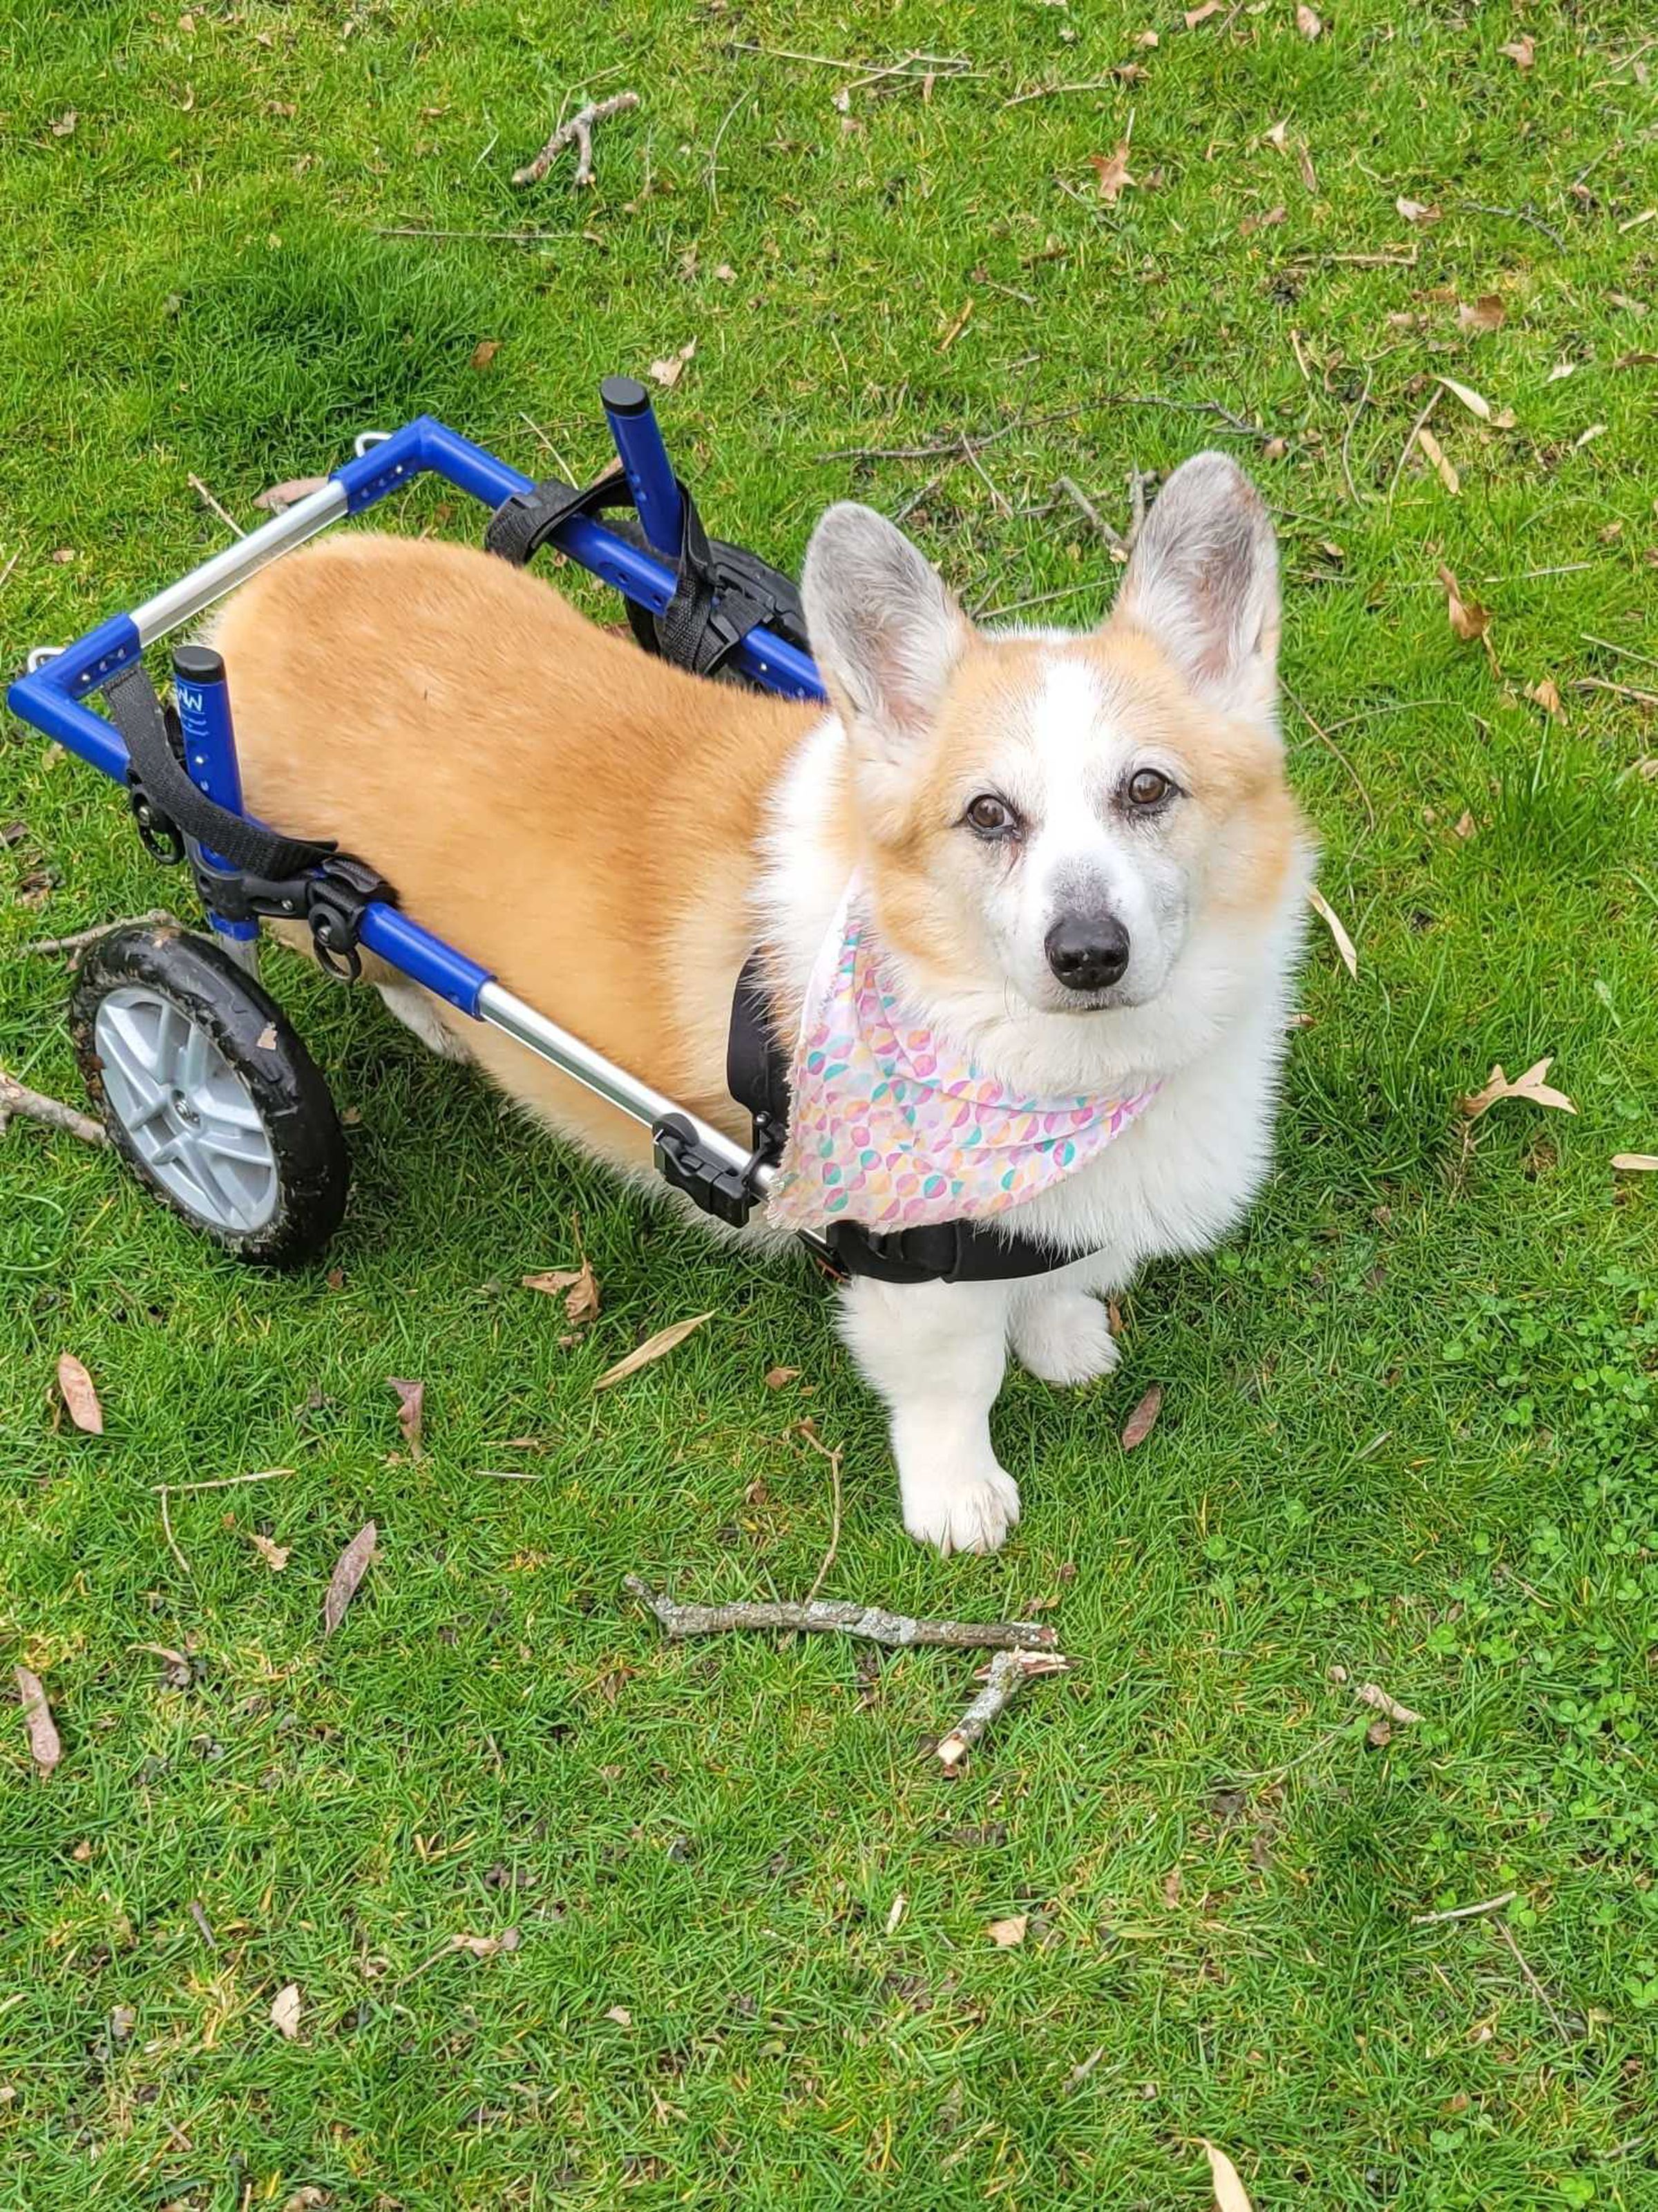 A brown and white corgi on a lawn with a wheeled cart supporting its back legs.